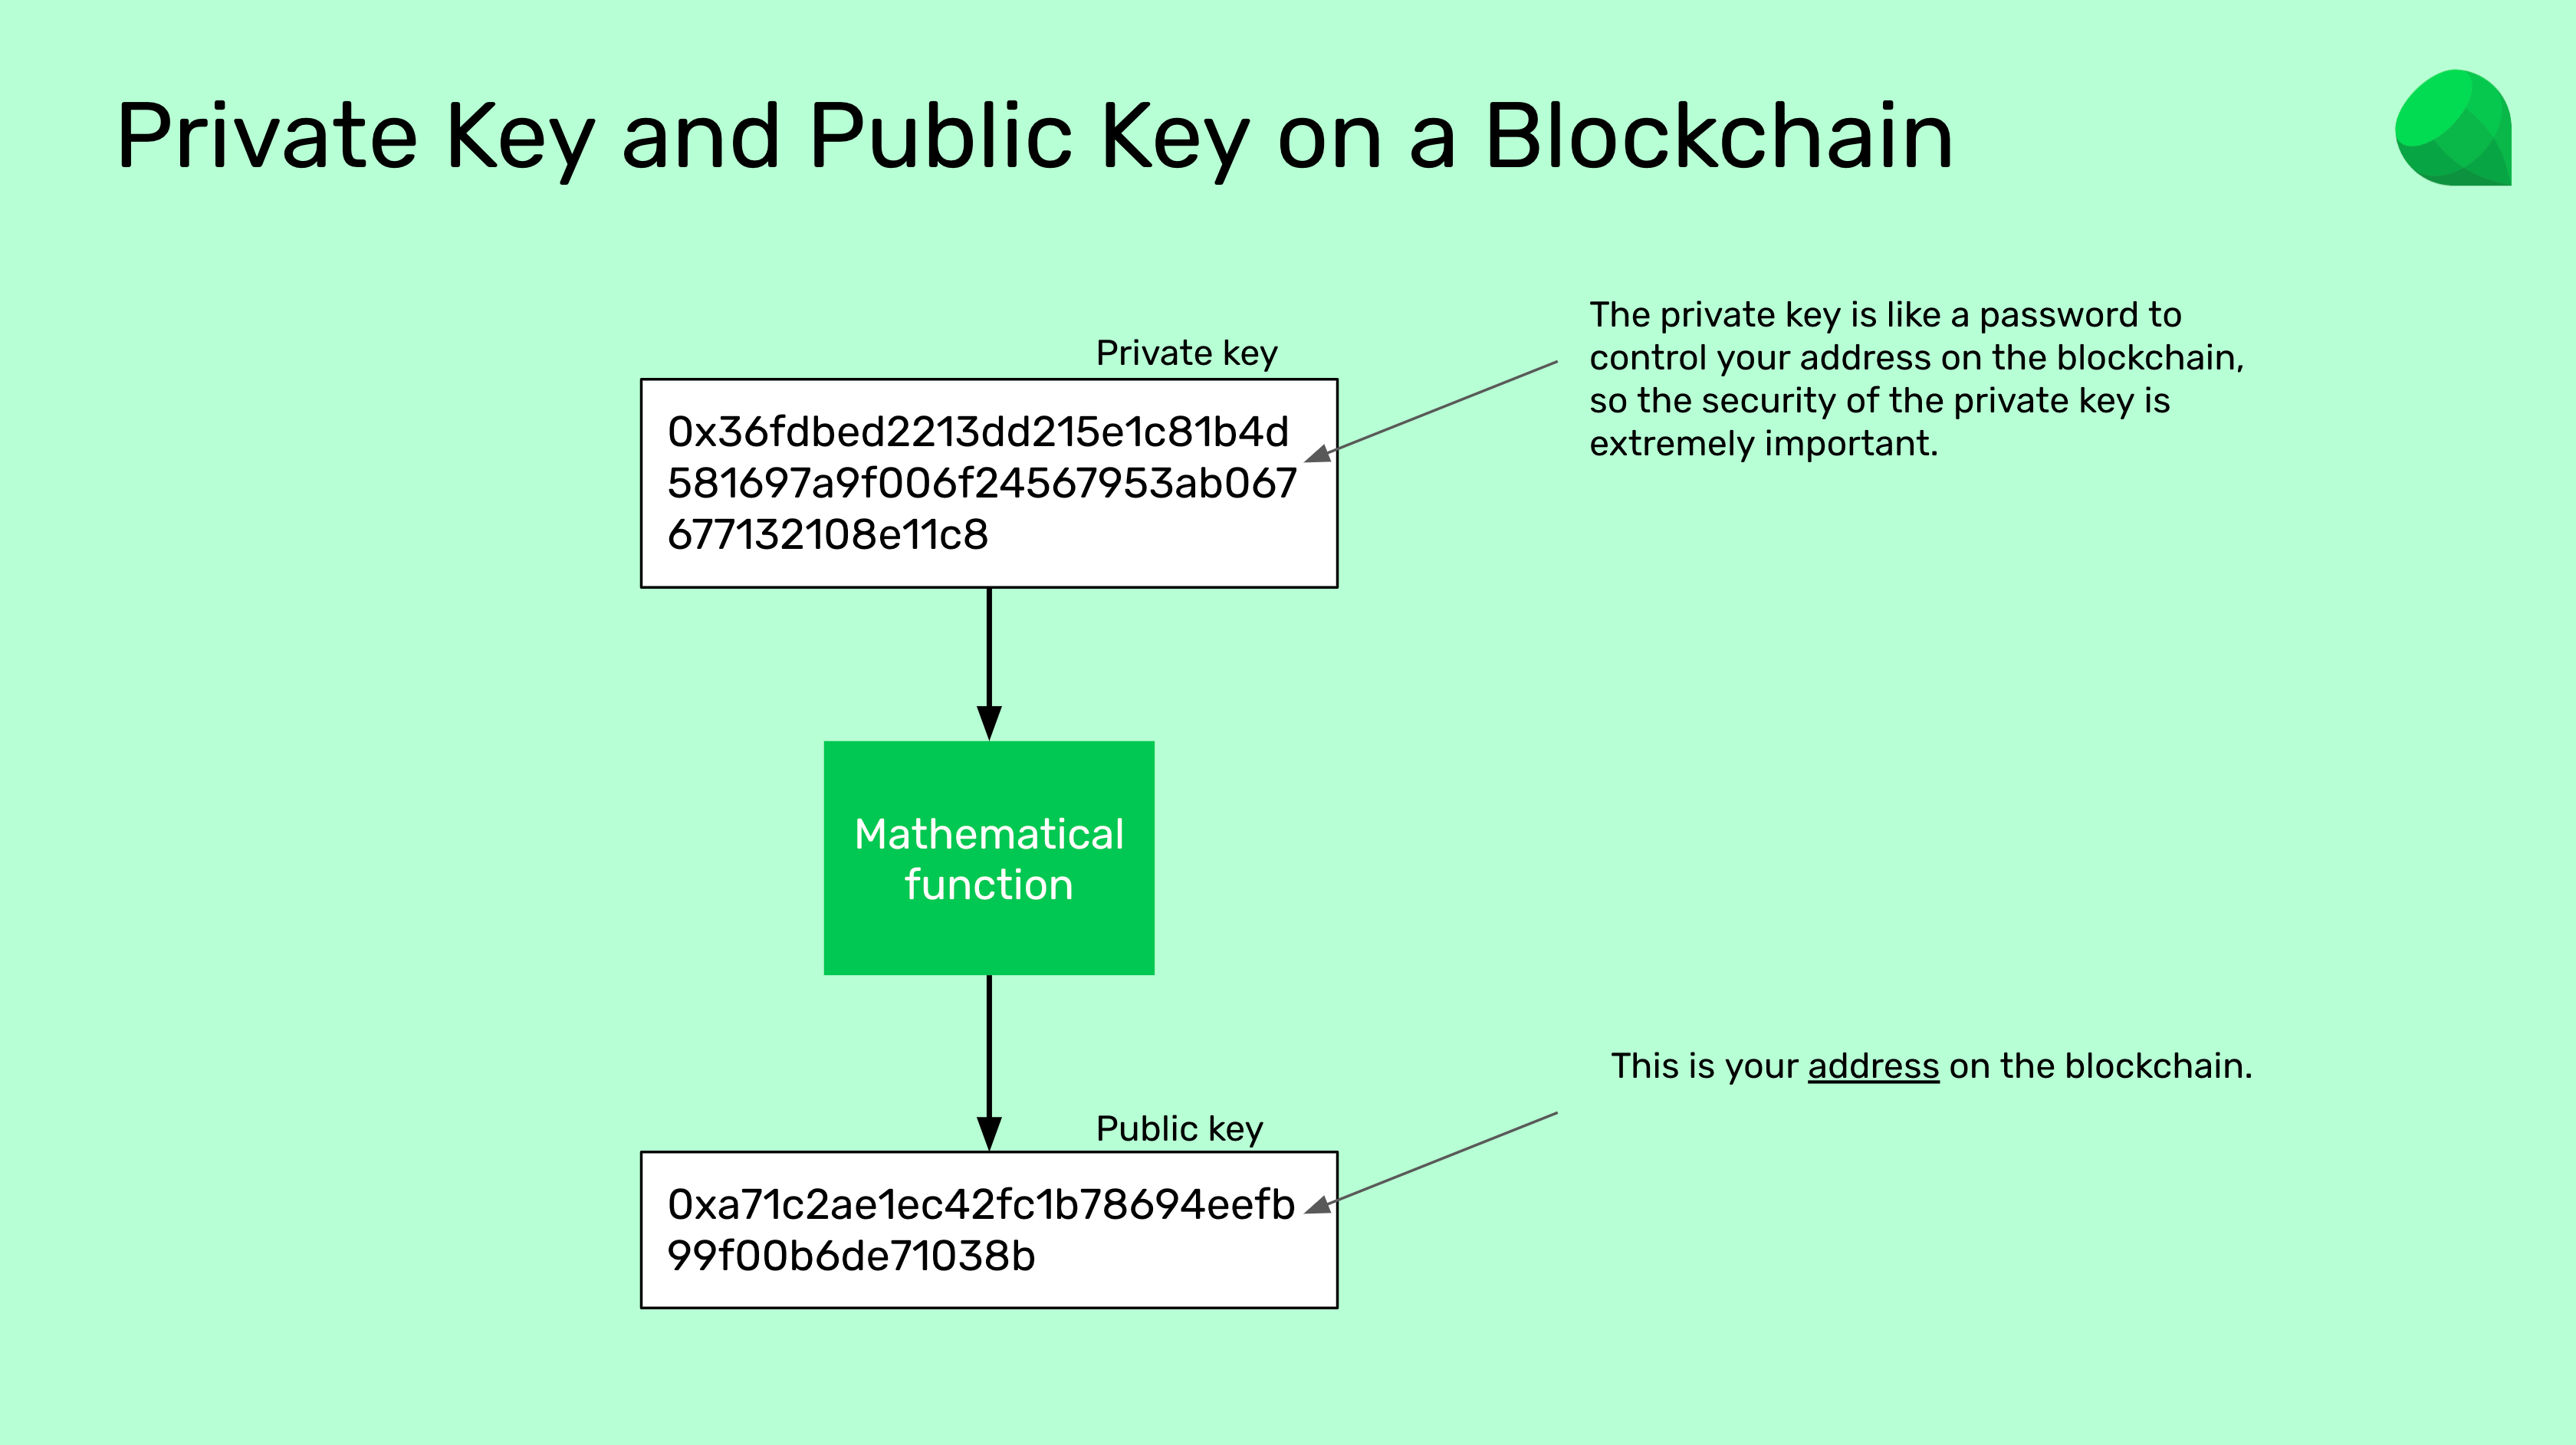 The public key is your address on a blockchain.